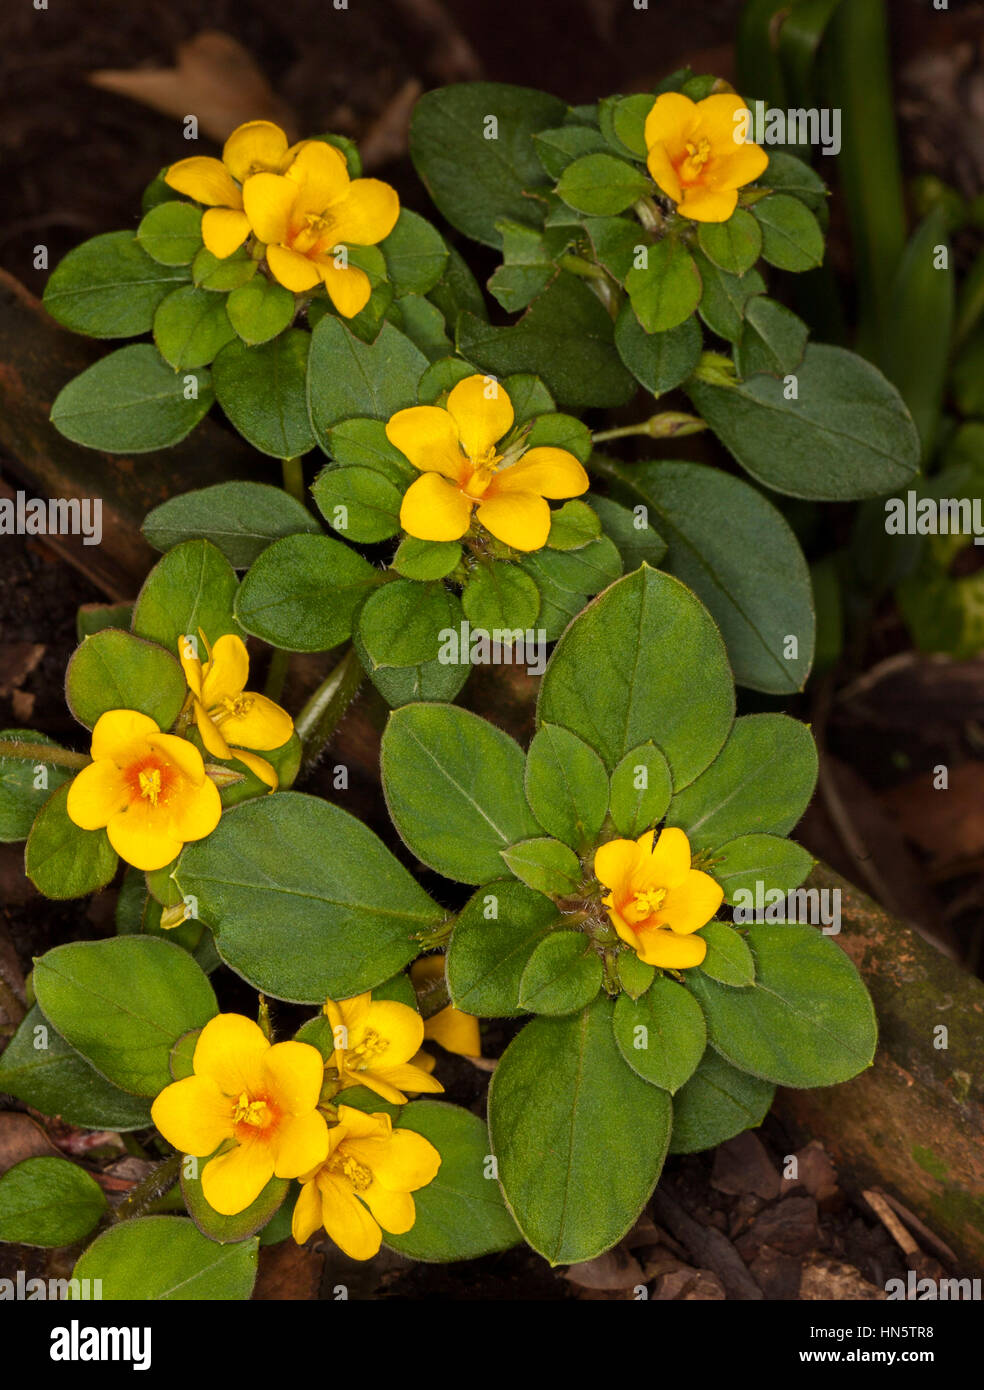 Cluster of golden yellow flowers of ground cover / rockery plant Lysimachia congestiflora surrounded by deep green foliage in Australian garden. Stock Photo